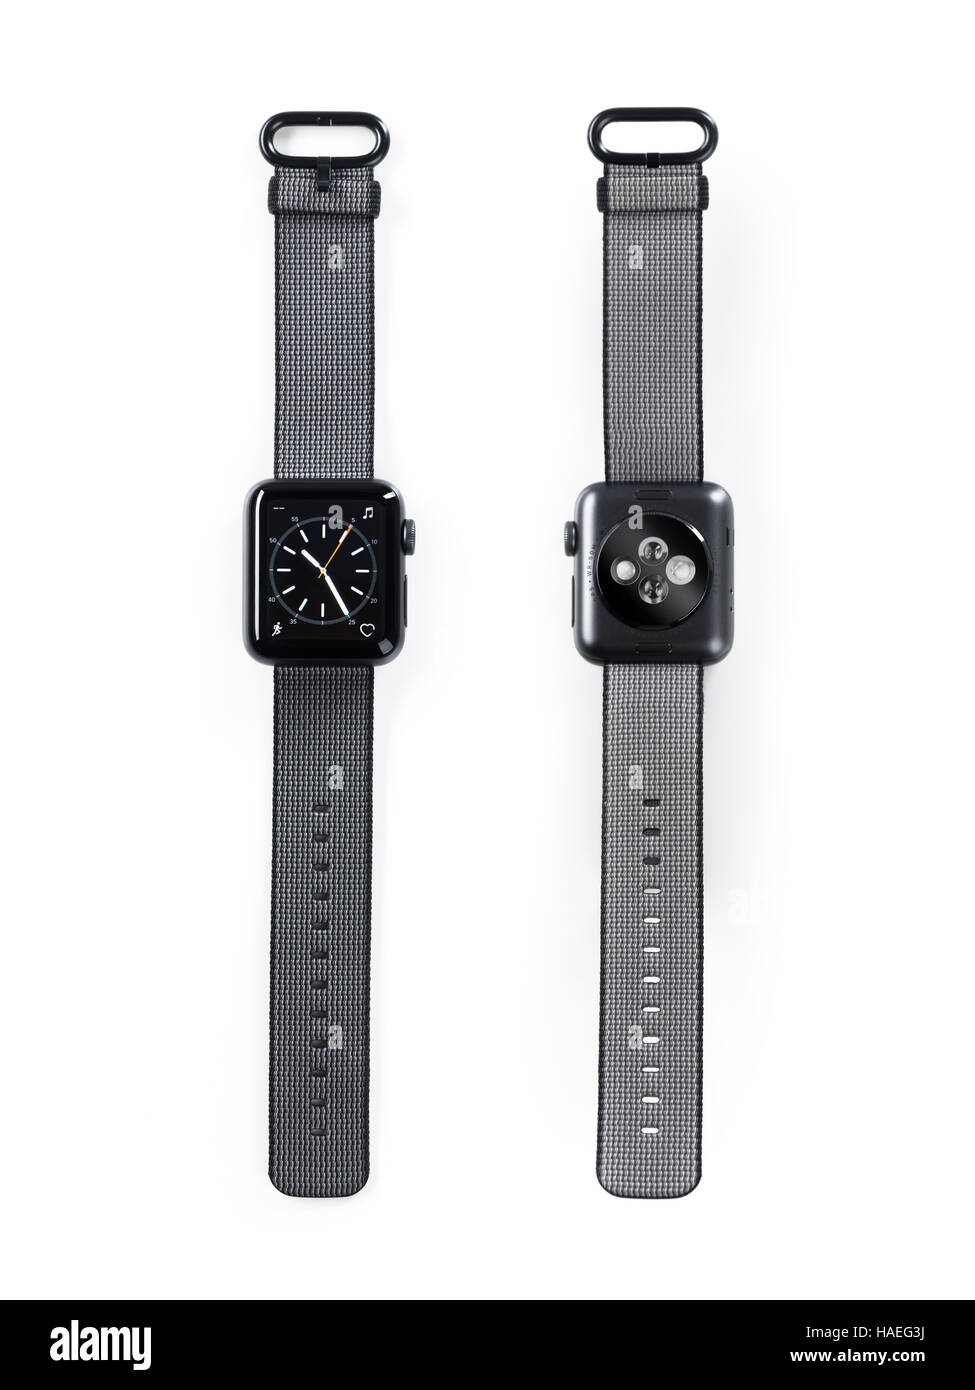 Apple Watch smartwatch front and back view isolated on black background Stock Photo